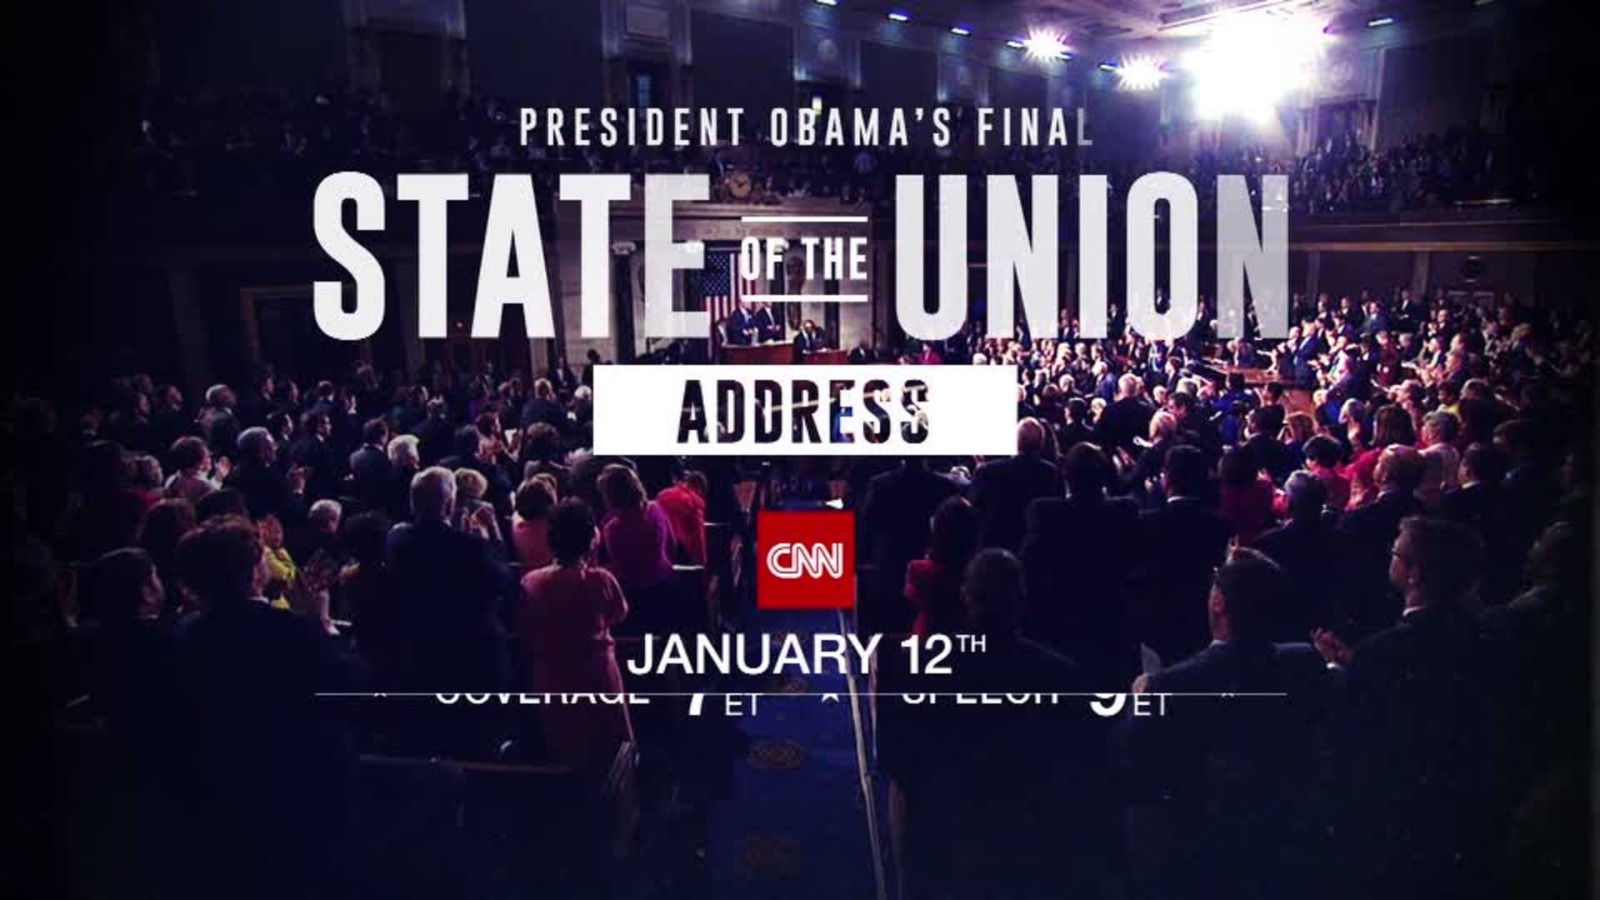 What is the State of the Union address?